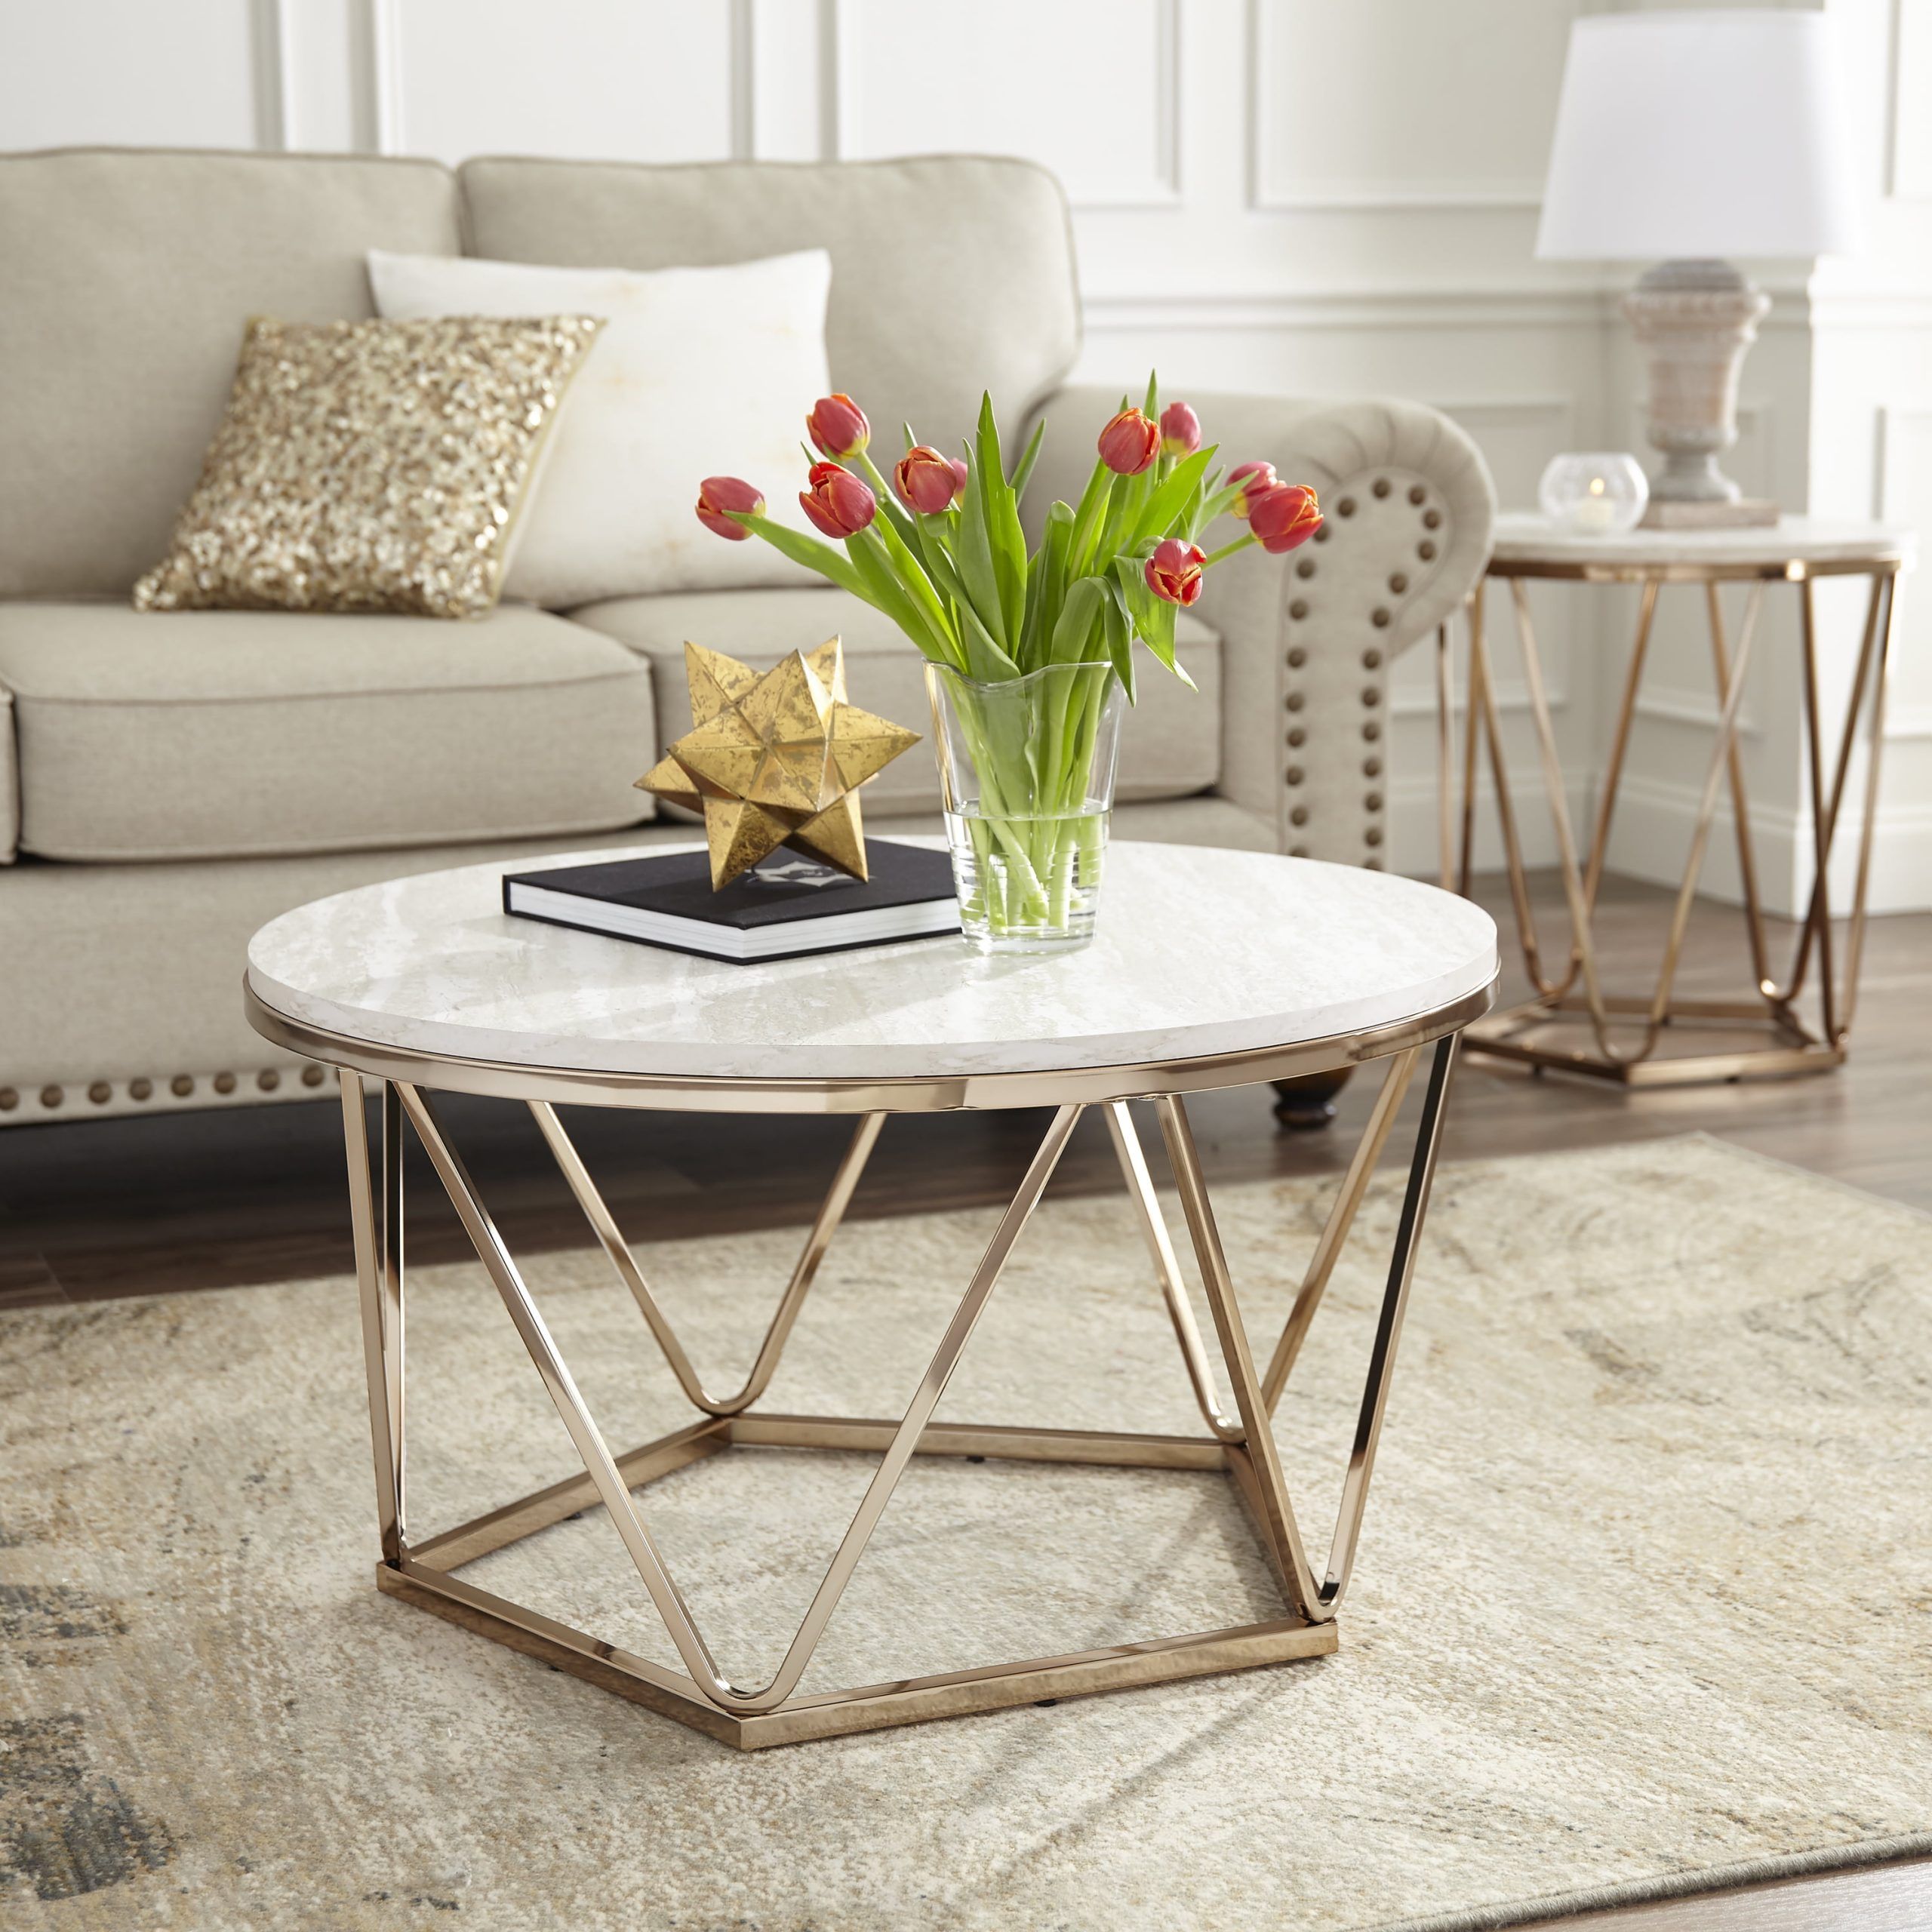 Leaci Modern Faux Stone Round Coffee Table – Walmart With Modern Round Faux Marble Coffee Tables (View 14 of 15)